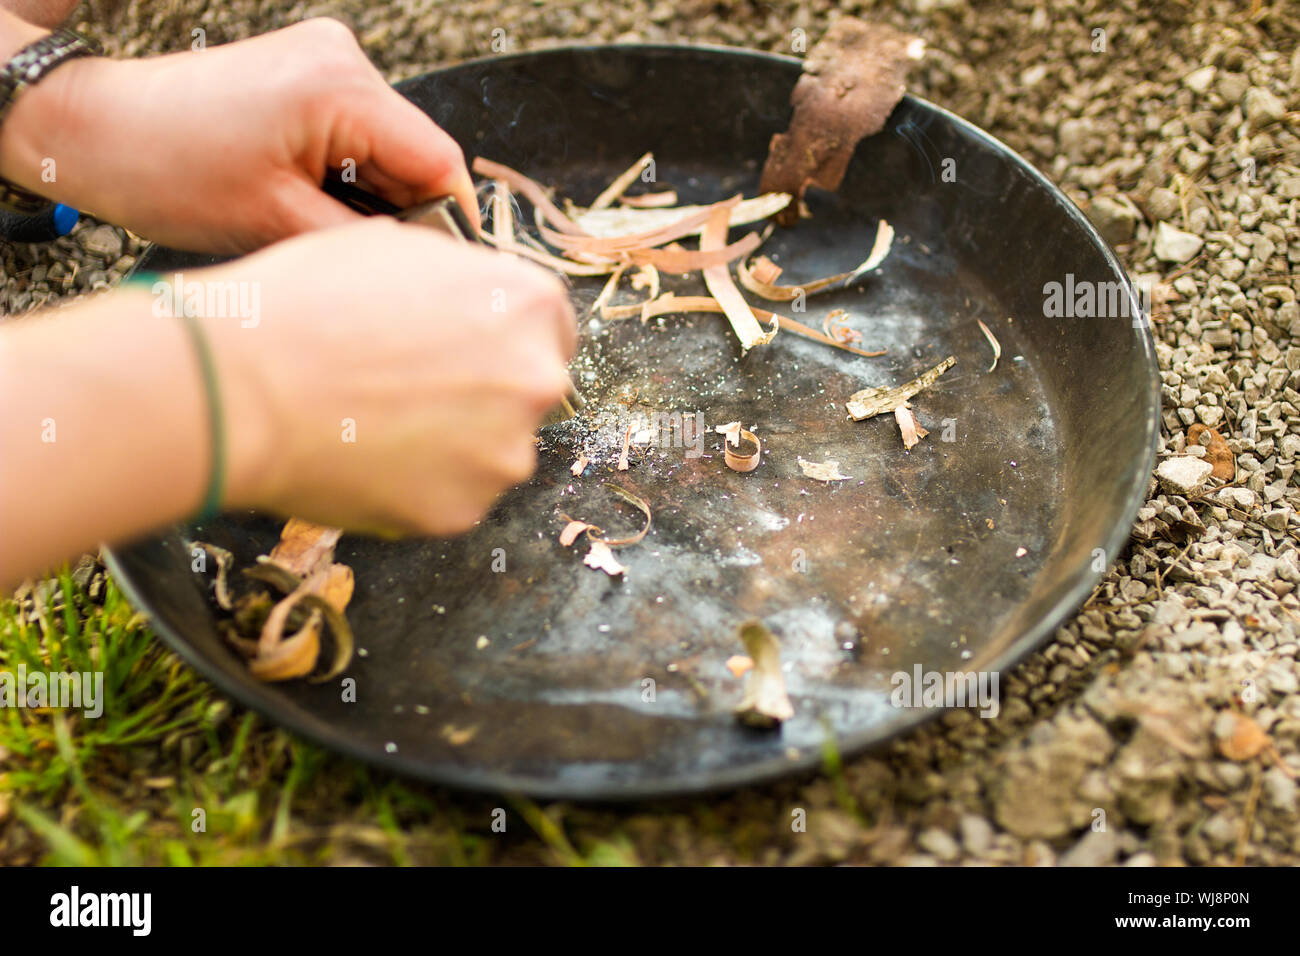 Close-up Of Hands Kindling A Fire With Natural Material Stock Photo